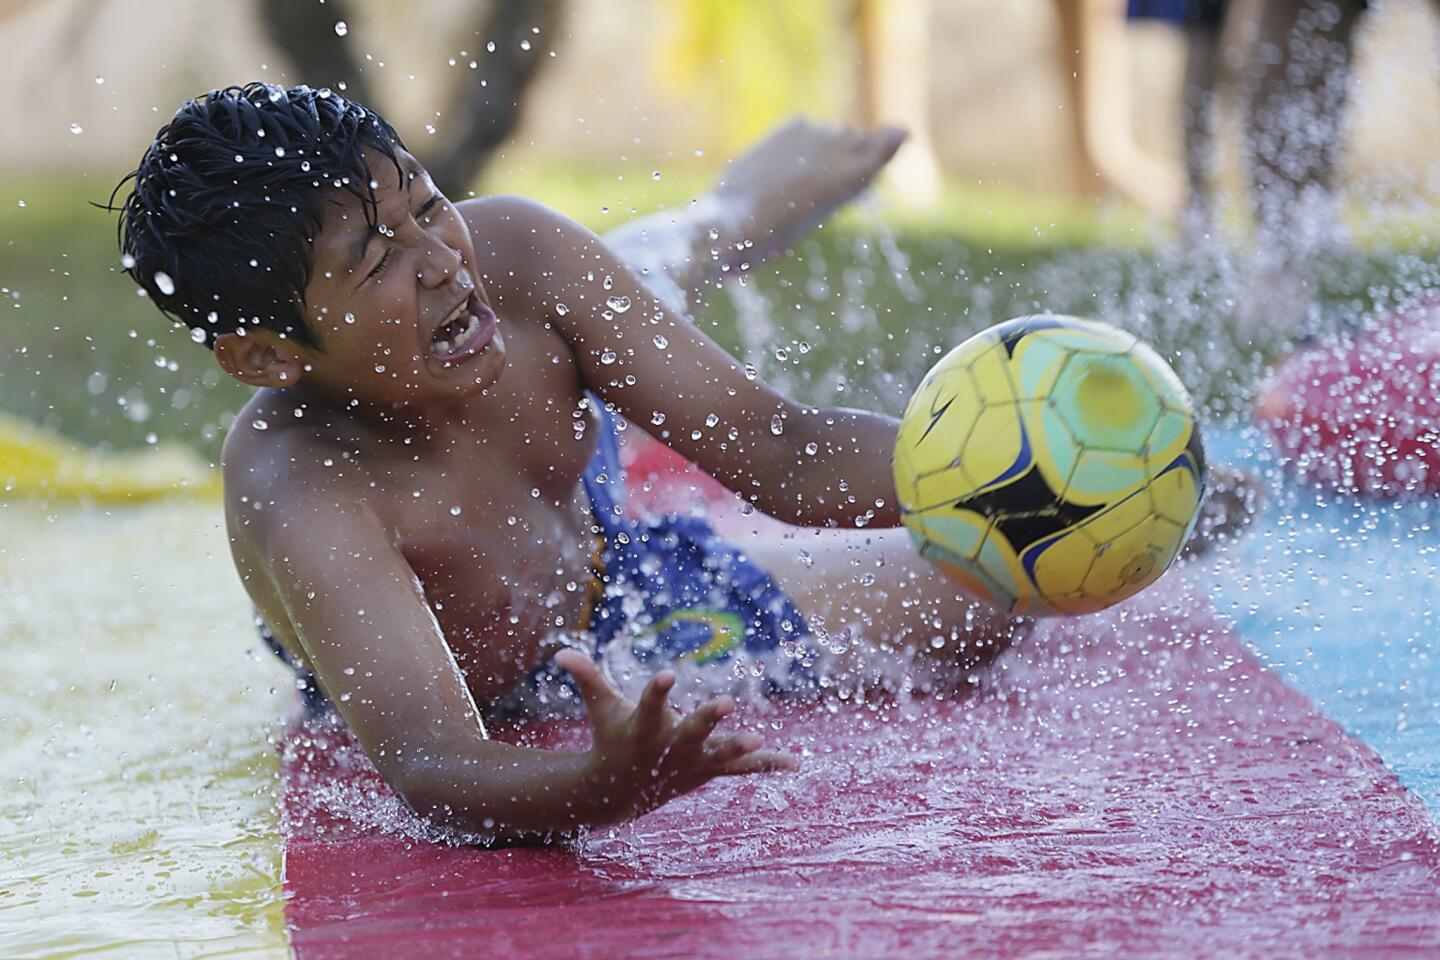 Azusa resident Jose Baltazar, 11, joins friends and relatives in a respite from high temperatures as they frolic on a slip-'n'-slide in Azusa.